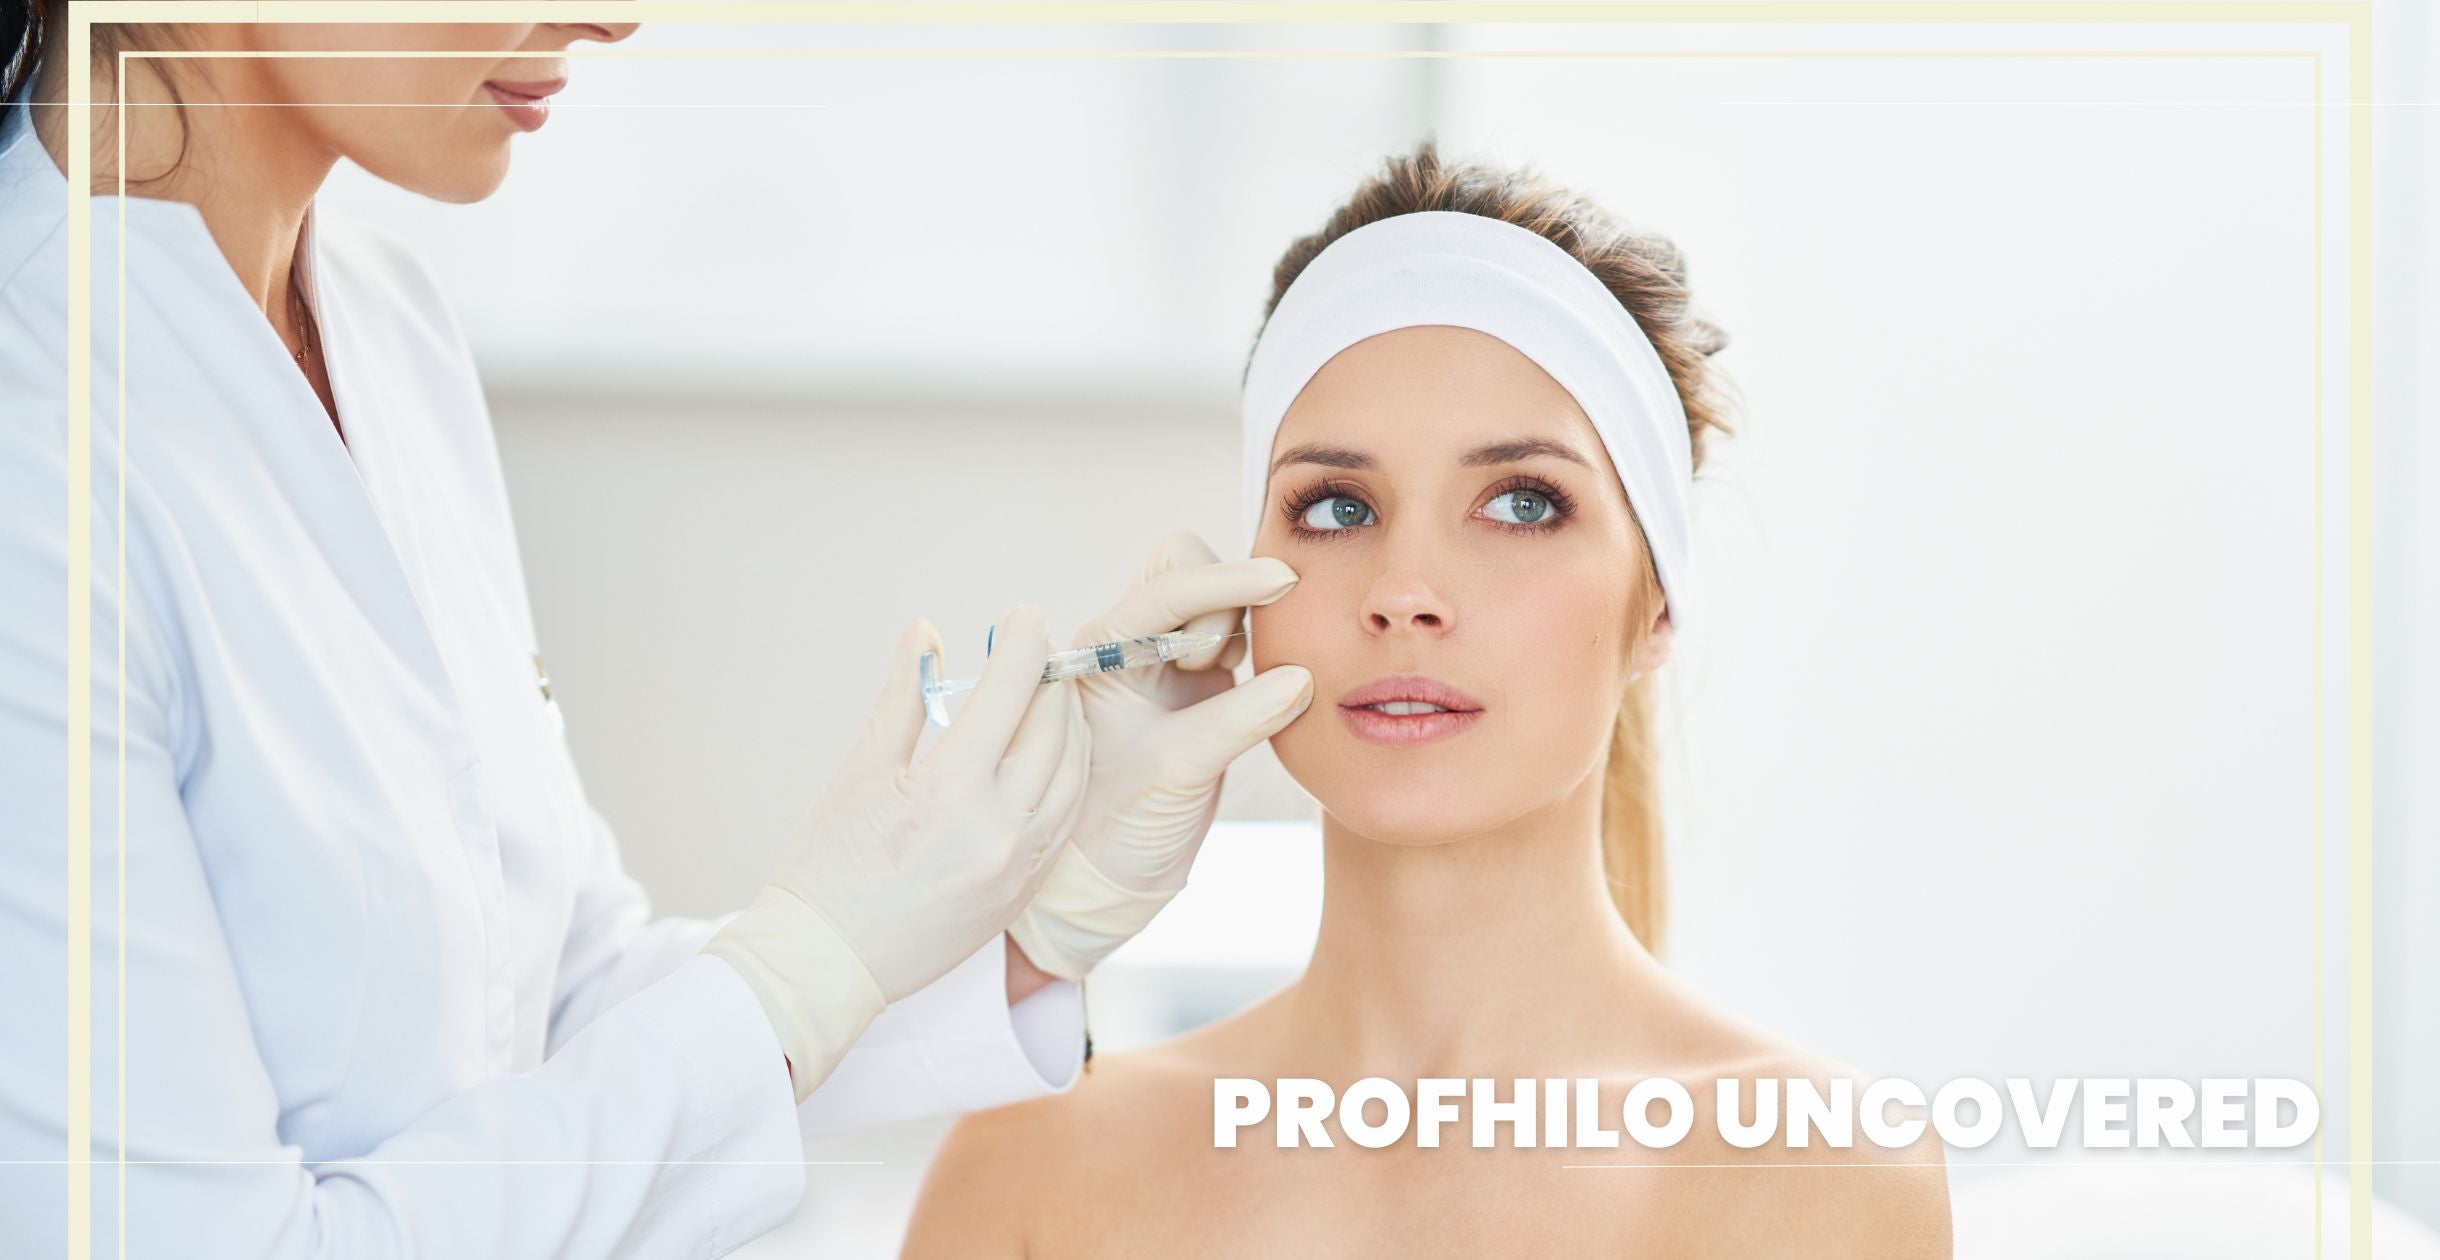 Profhilo Uncovered: Understanding the Breakthrough in Injectable Skin Treatments